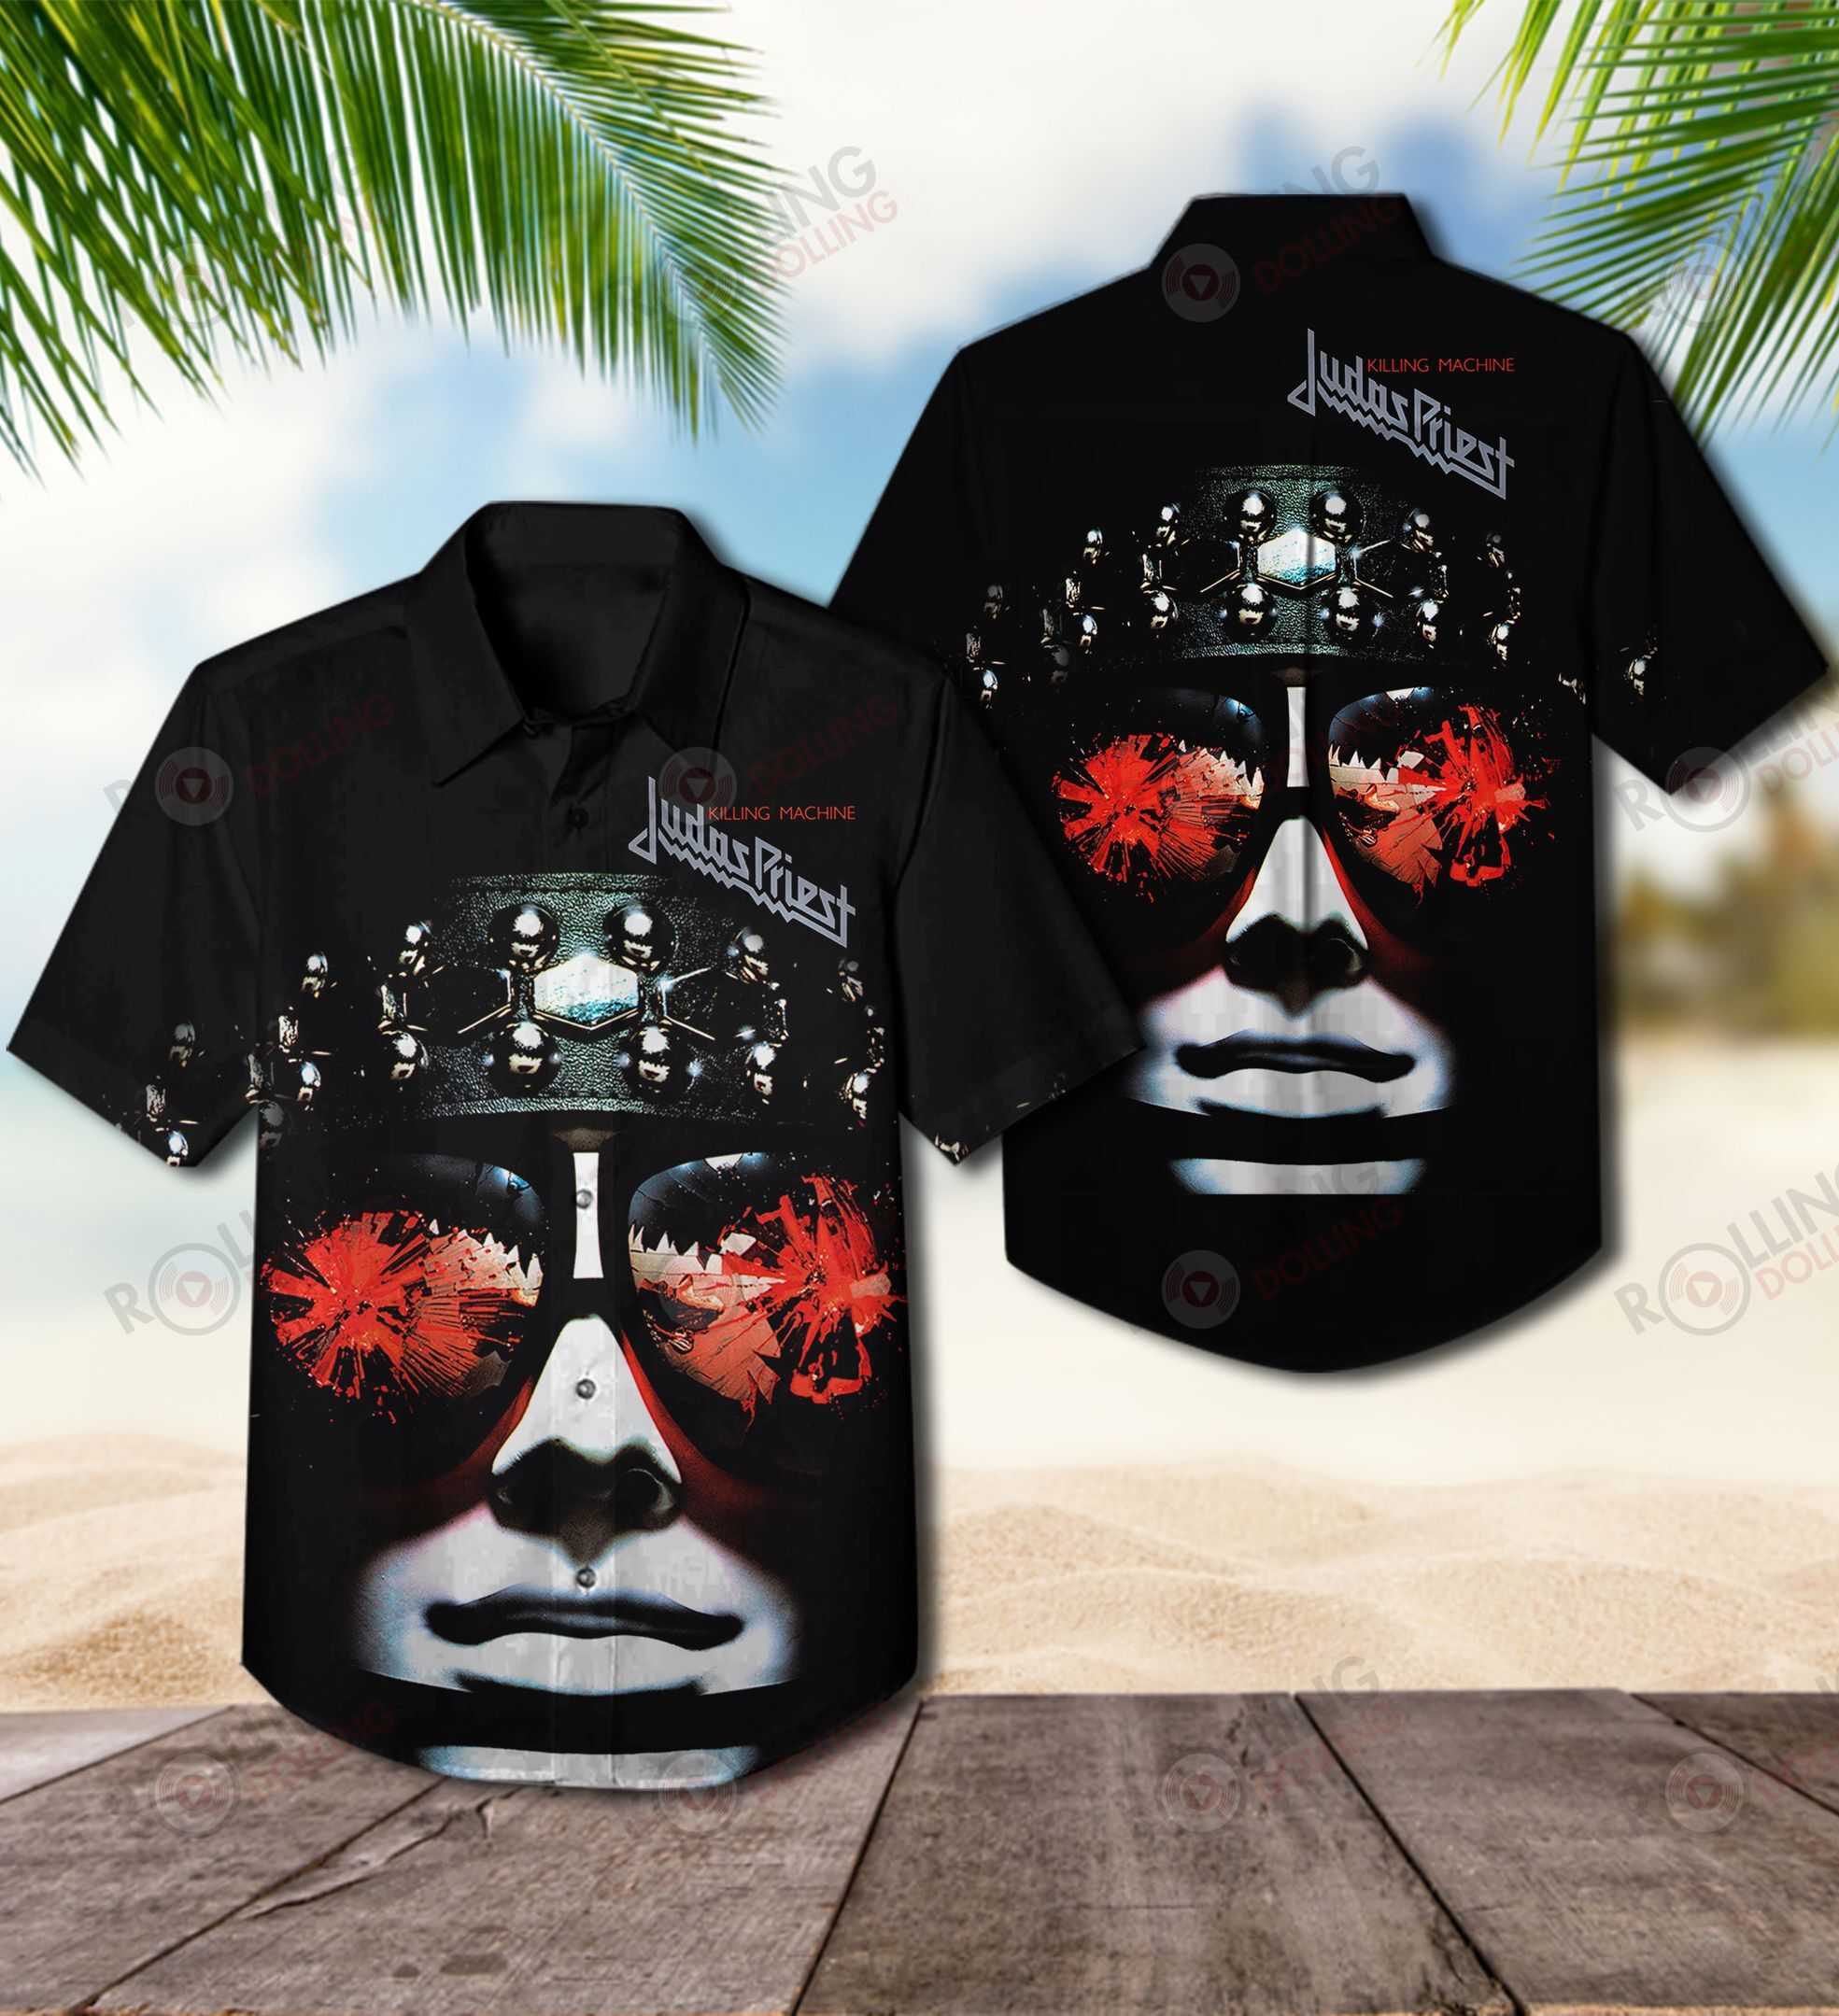 For summer, consider wearing This Amazing Hawaiian Shirt shirt in our store 82